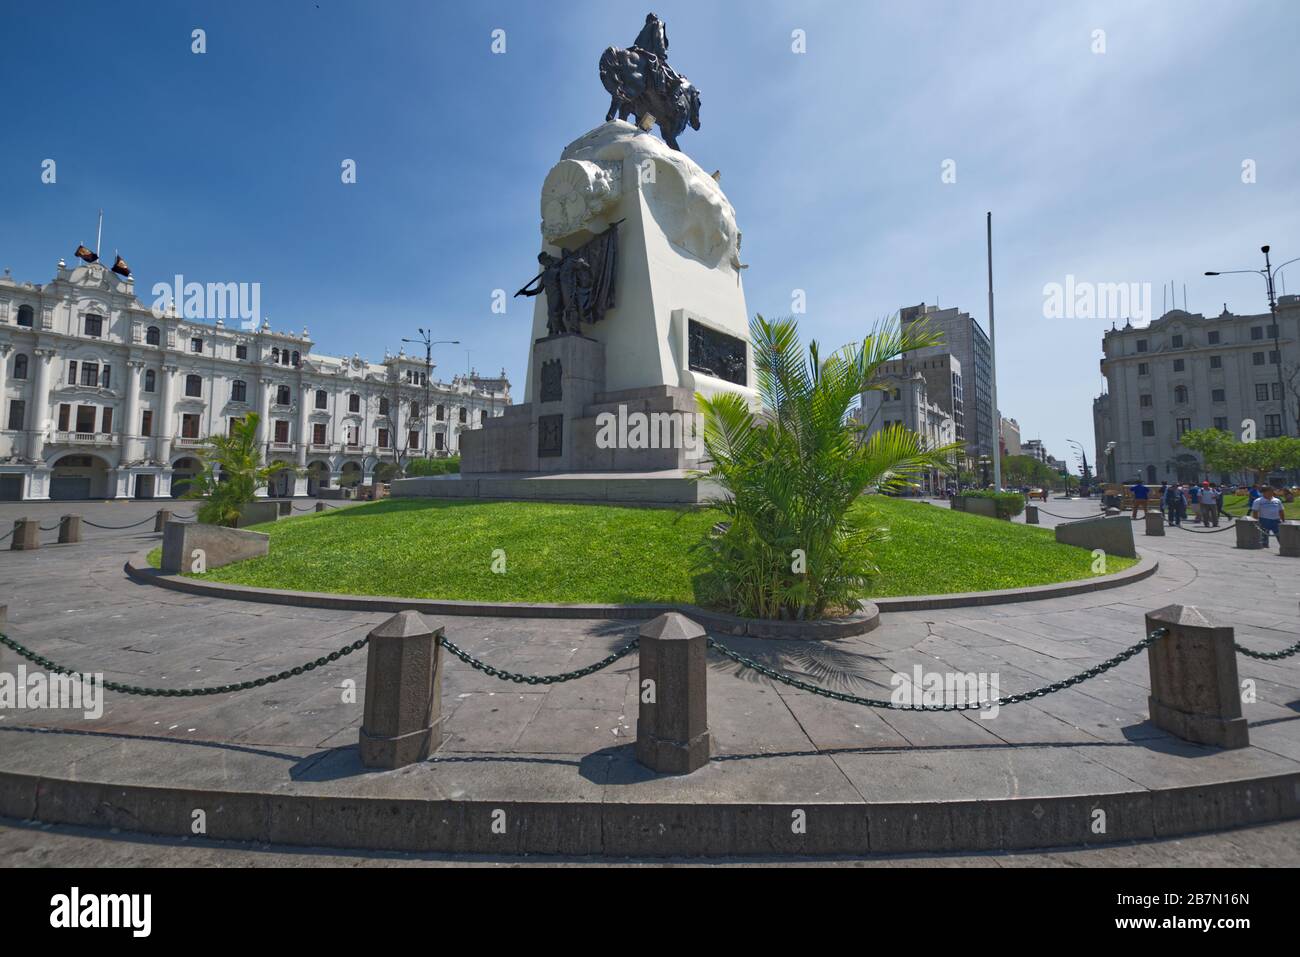 Lima, Peru - April 18, 2018: Back of statue of General San Martin showing additional sculpture at rear. Stock Photo